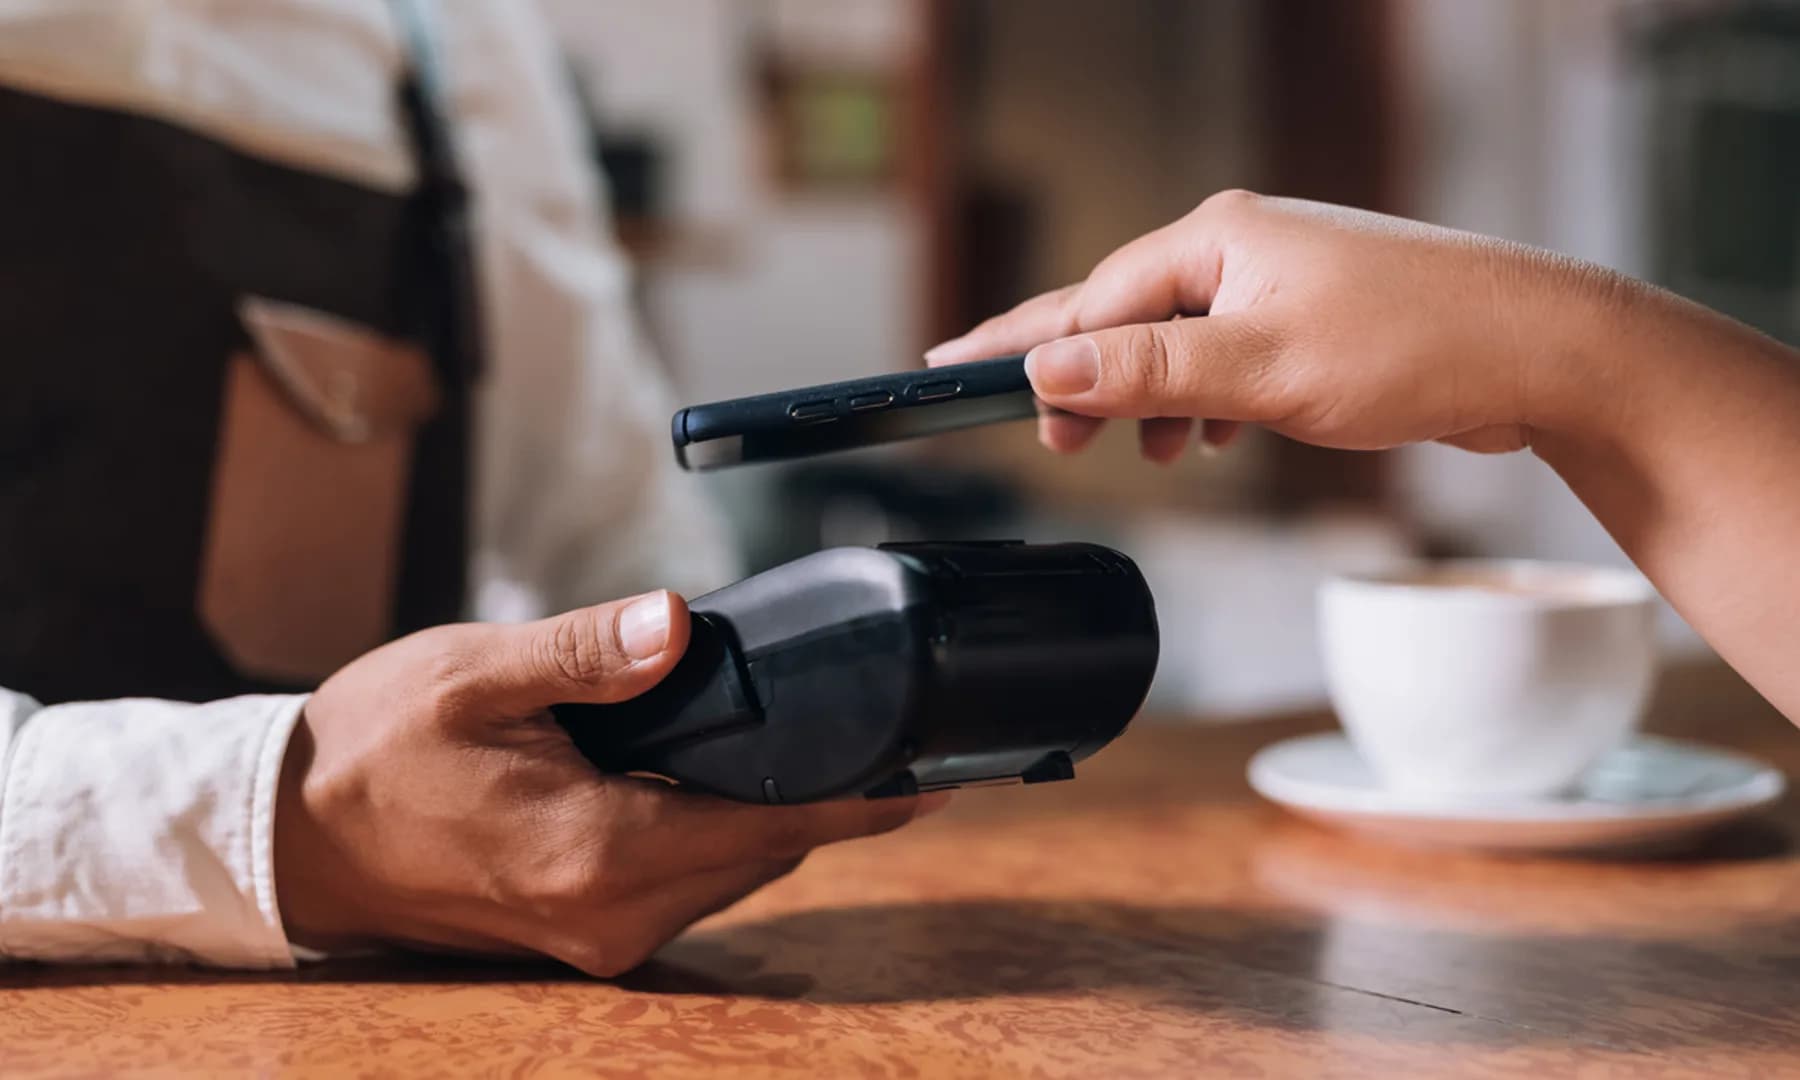 The age of contactless payment and the e-wallet revolution